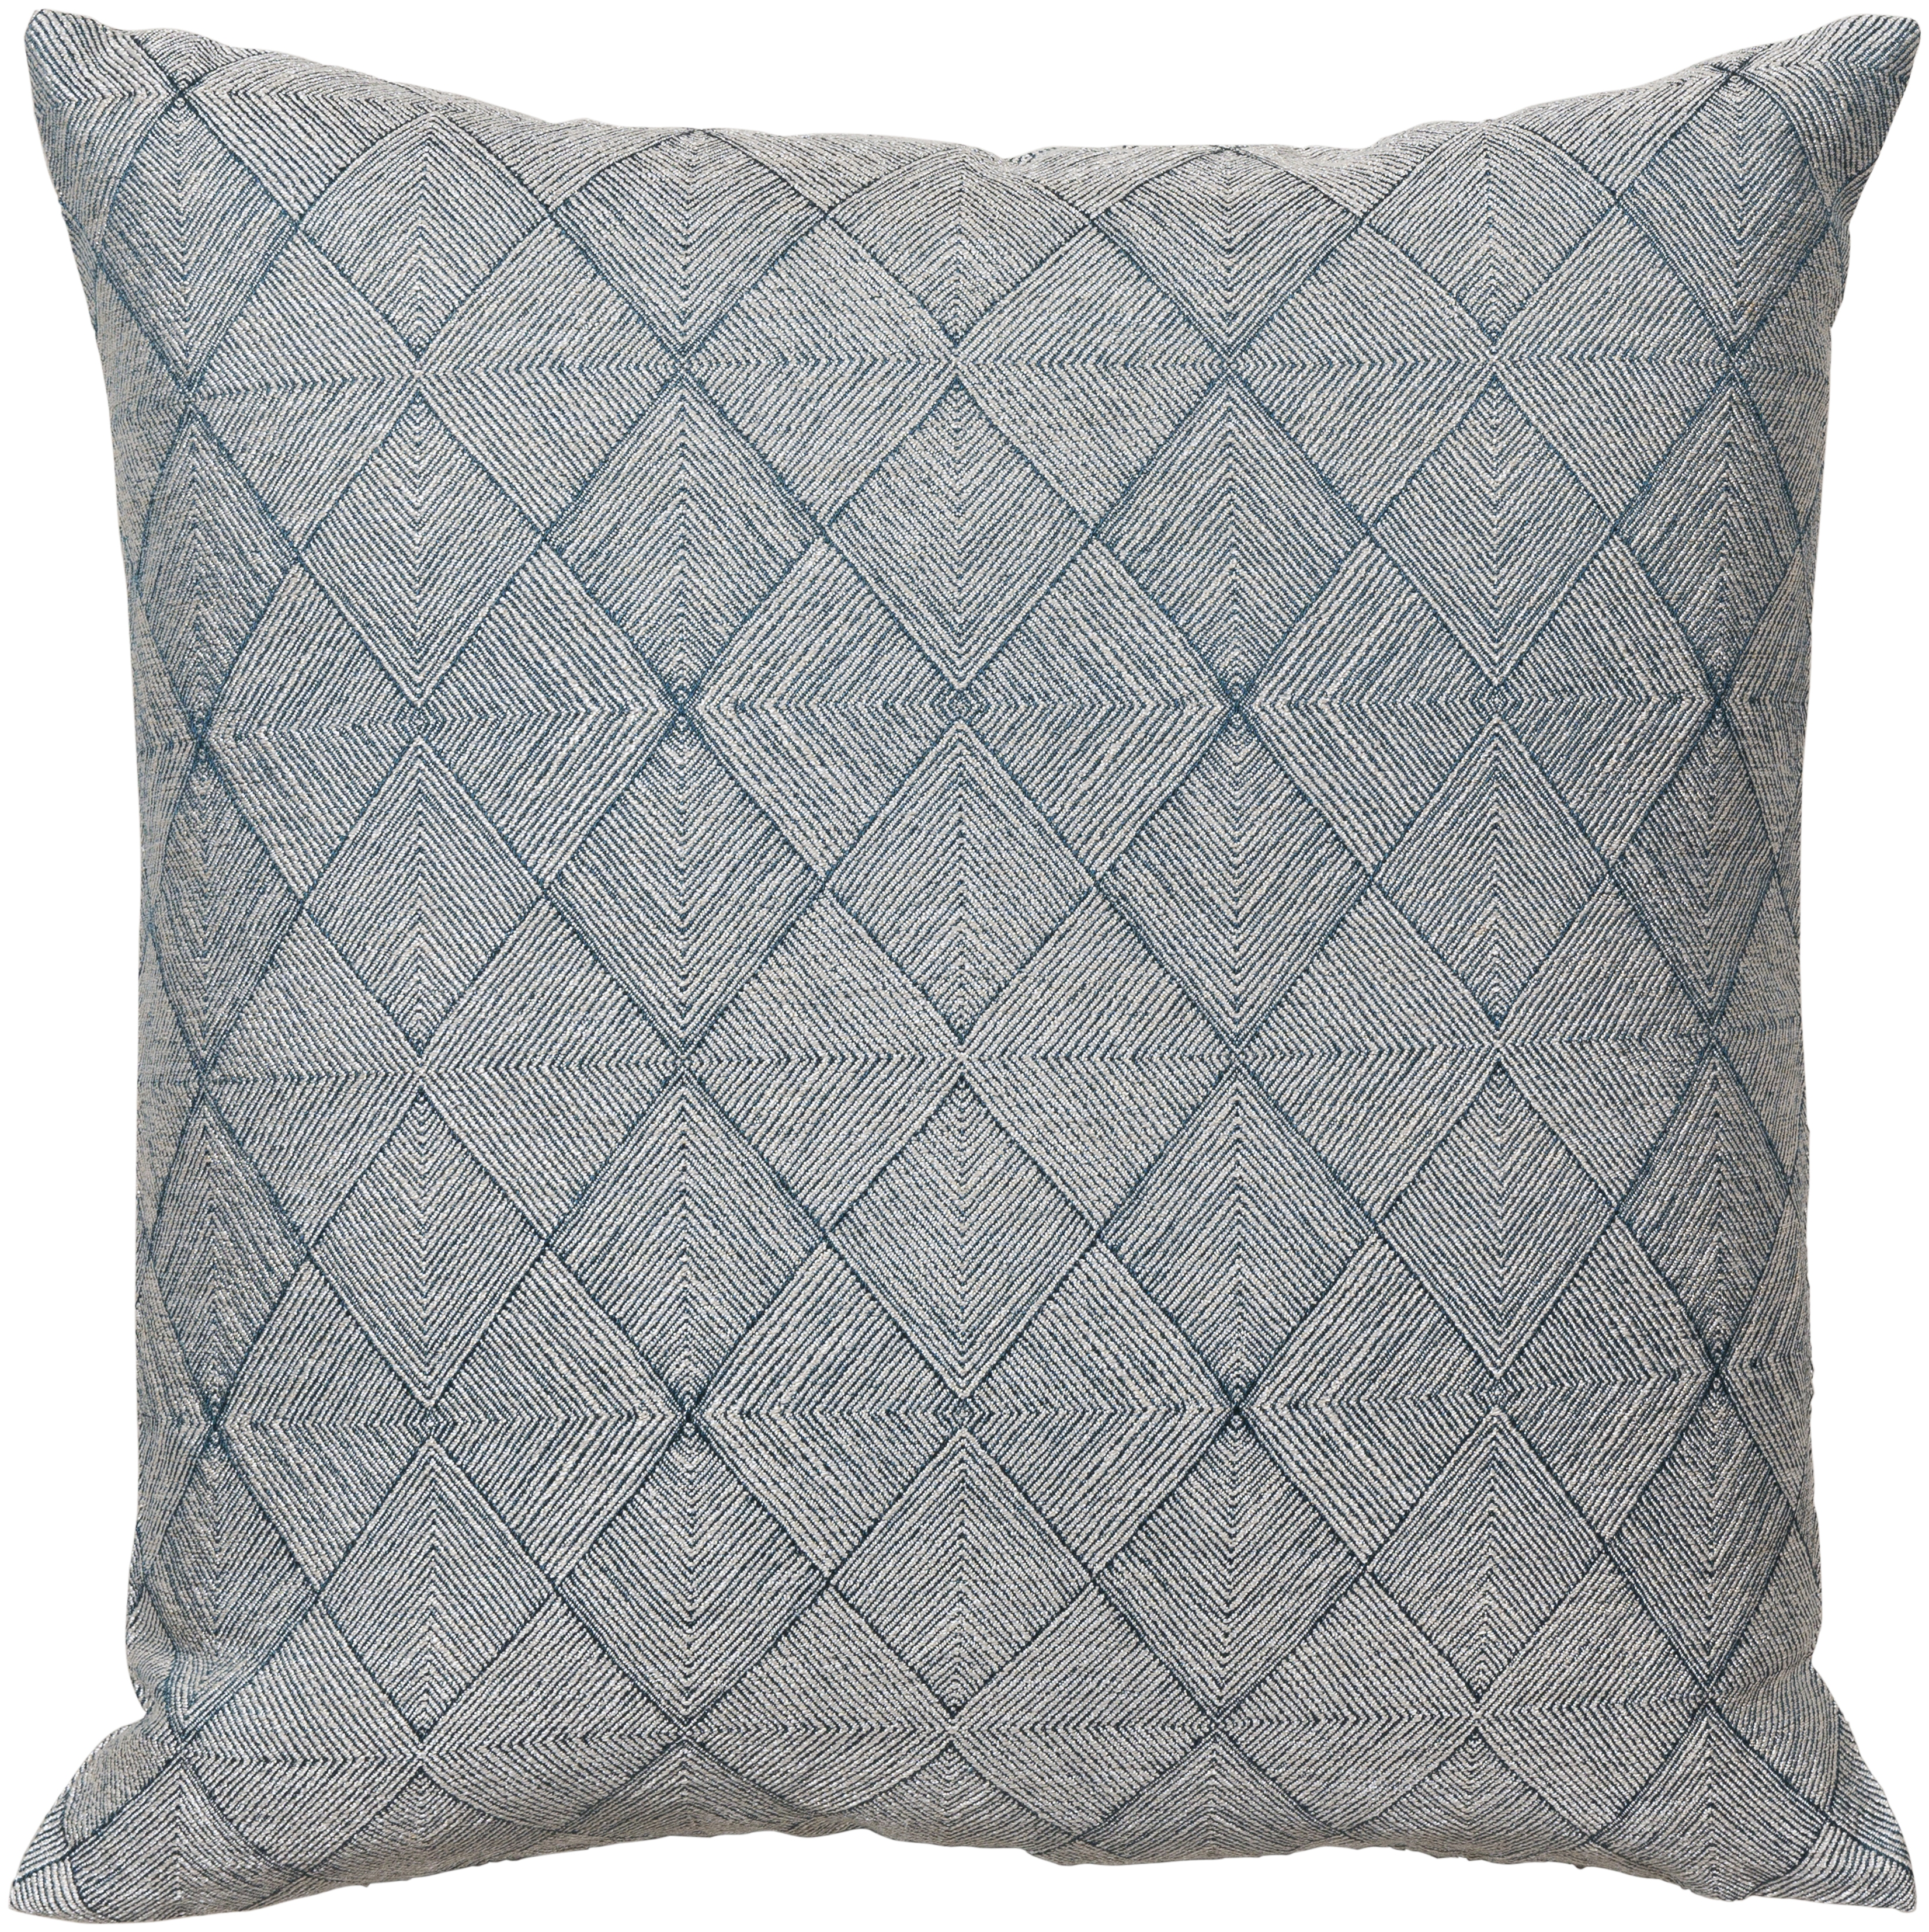 Messina Pillow, 22" x 22", Teal & Champagne - Image 0